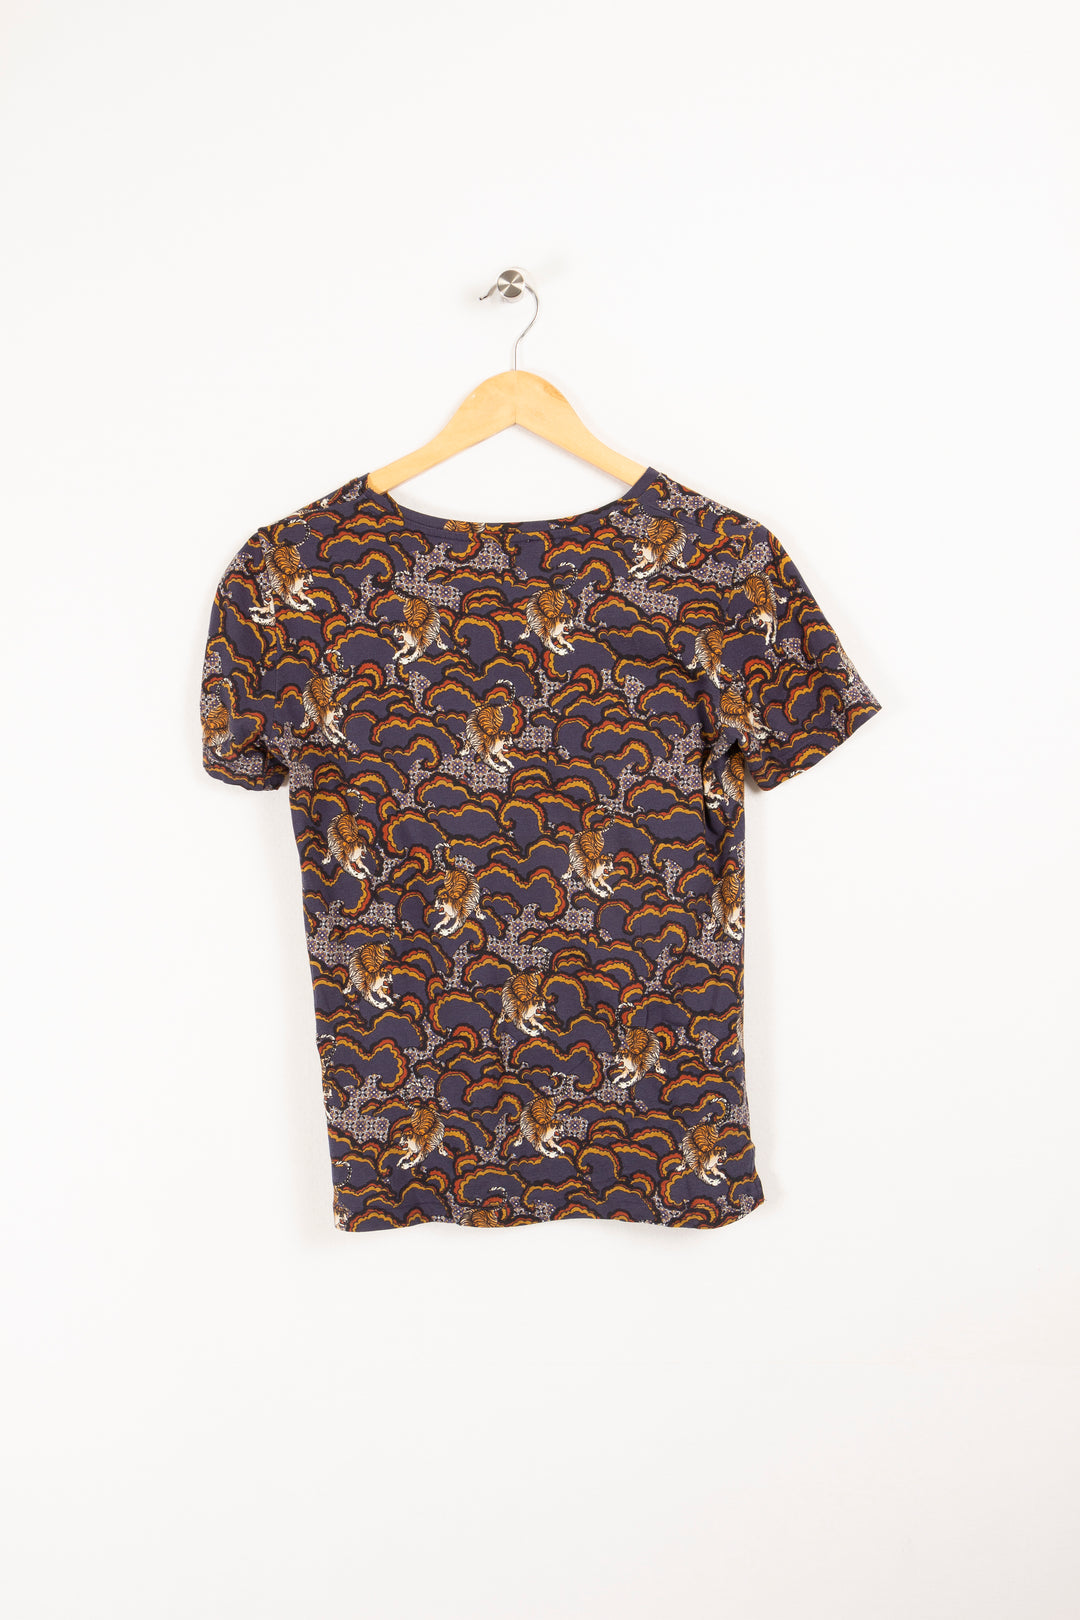 T-shirt with clouds and tigers patterns - M / 38